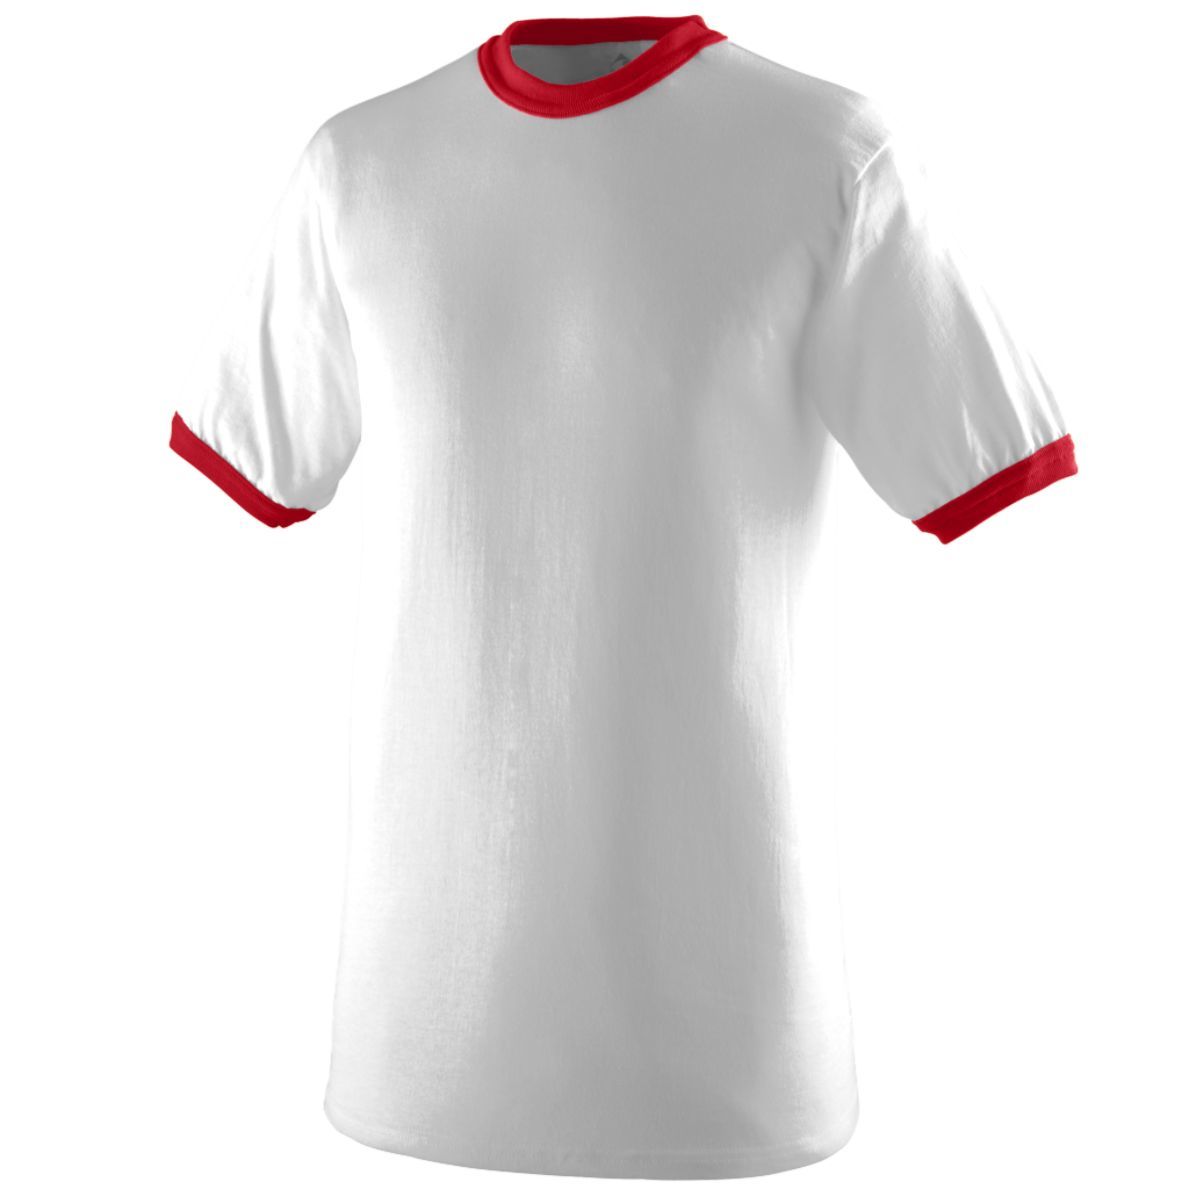 Augusta Sportswear Youth-Ringer T-Shirt in White/Red  -Part of the Youth, Youth-Tee-Shirt, T-Shirts, Augusta-Products, Soccer, Shirts, All-Sports-1 product lines at KanaleyCreations.com